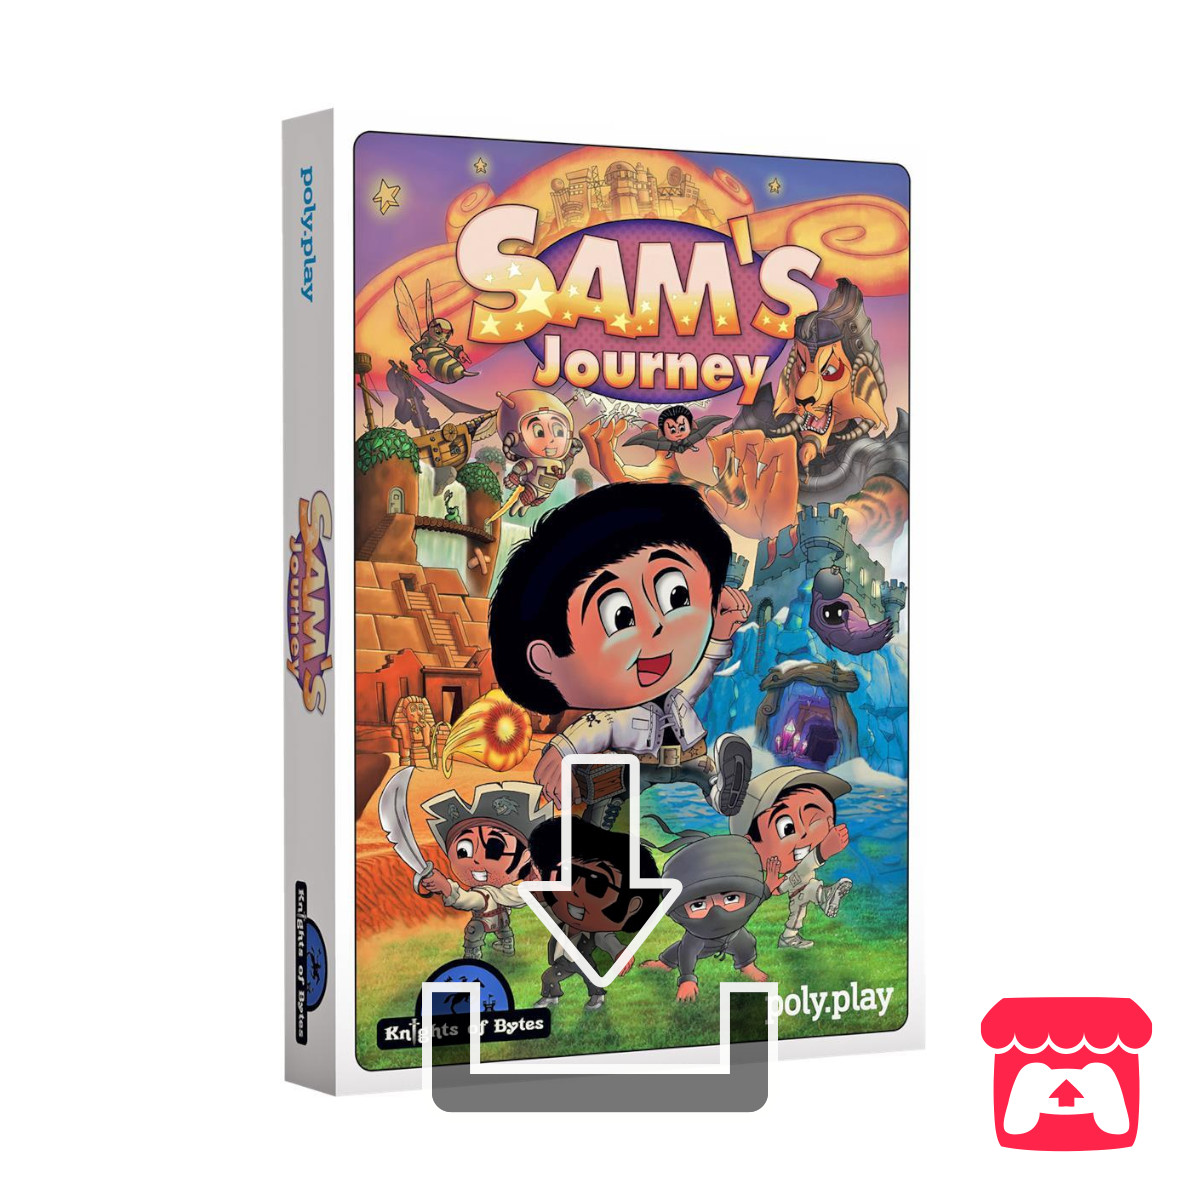 Sam's Journey Download Edition At Itch.io